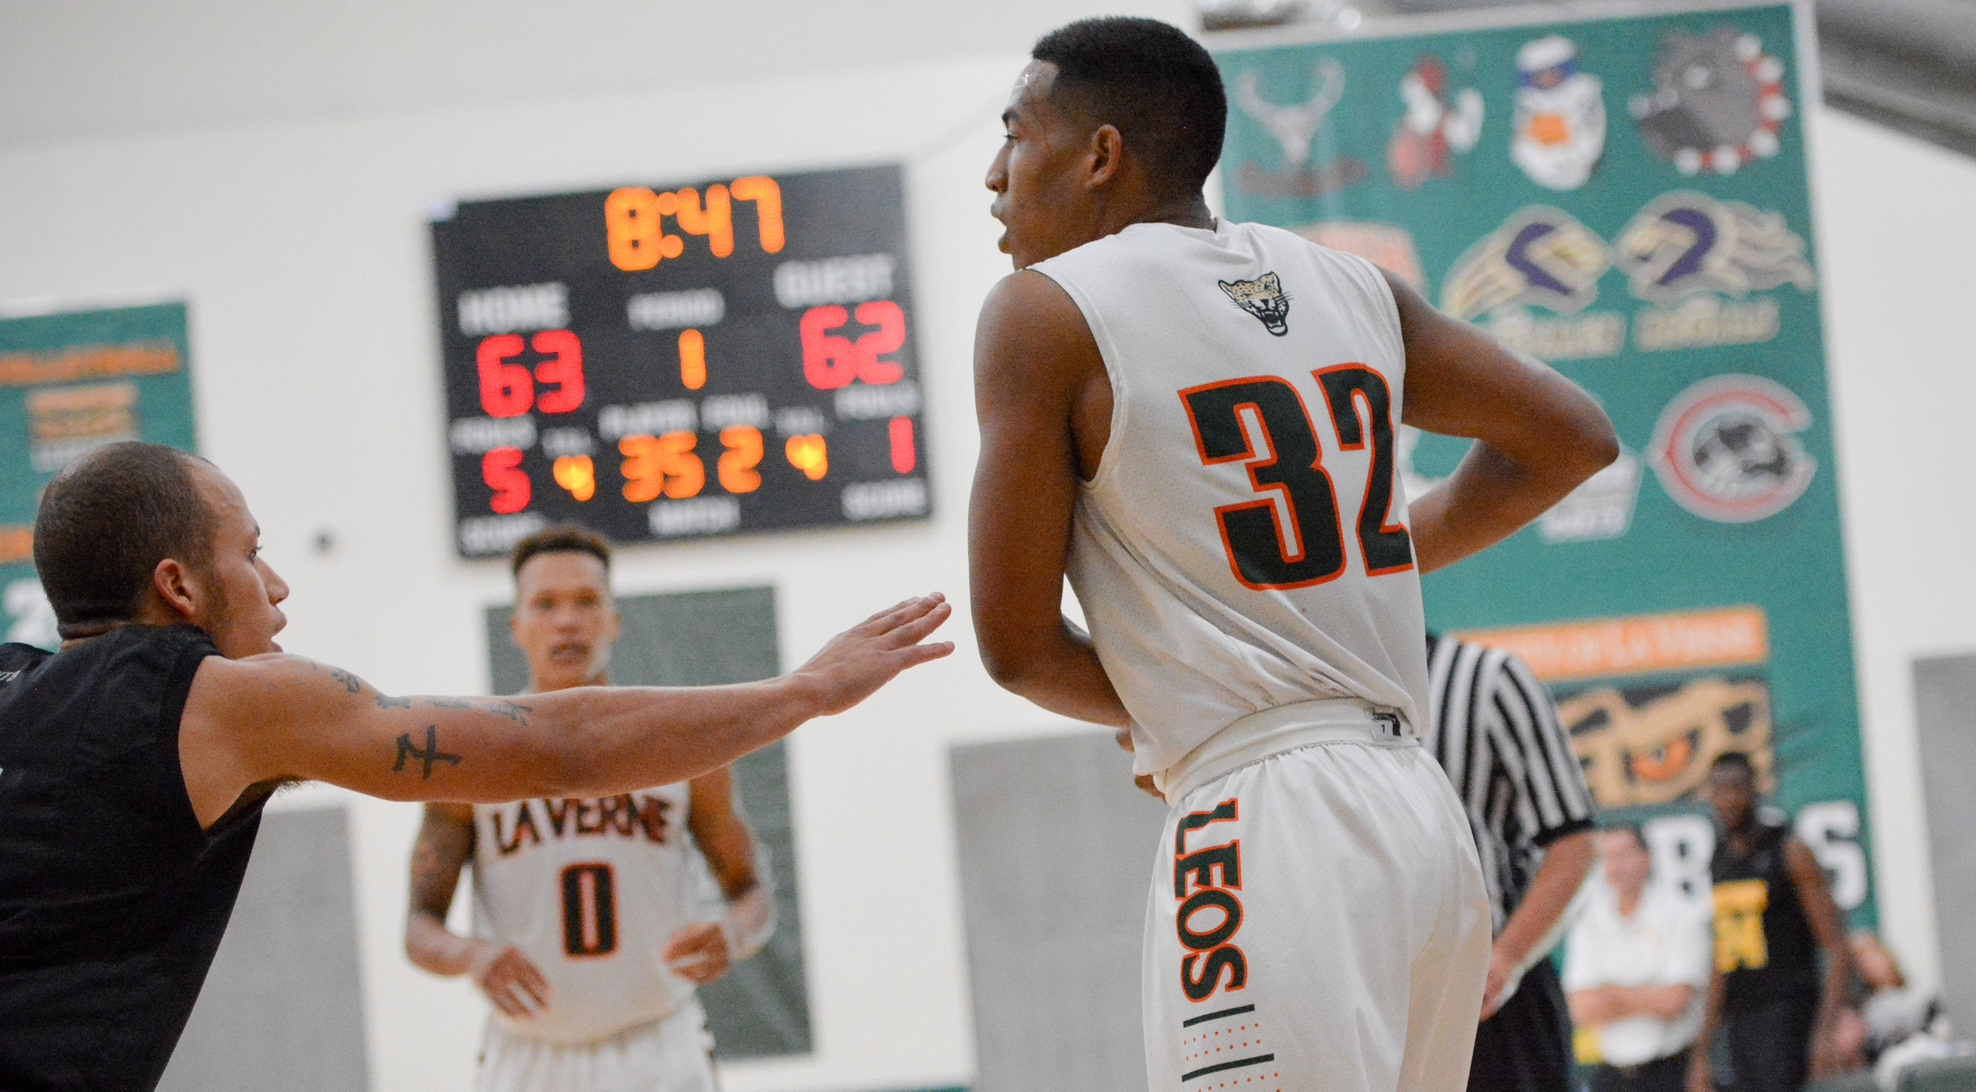 White has 26 and 12 to lead La Verne past Linfield 87-80